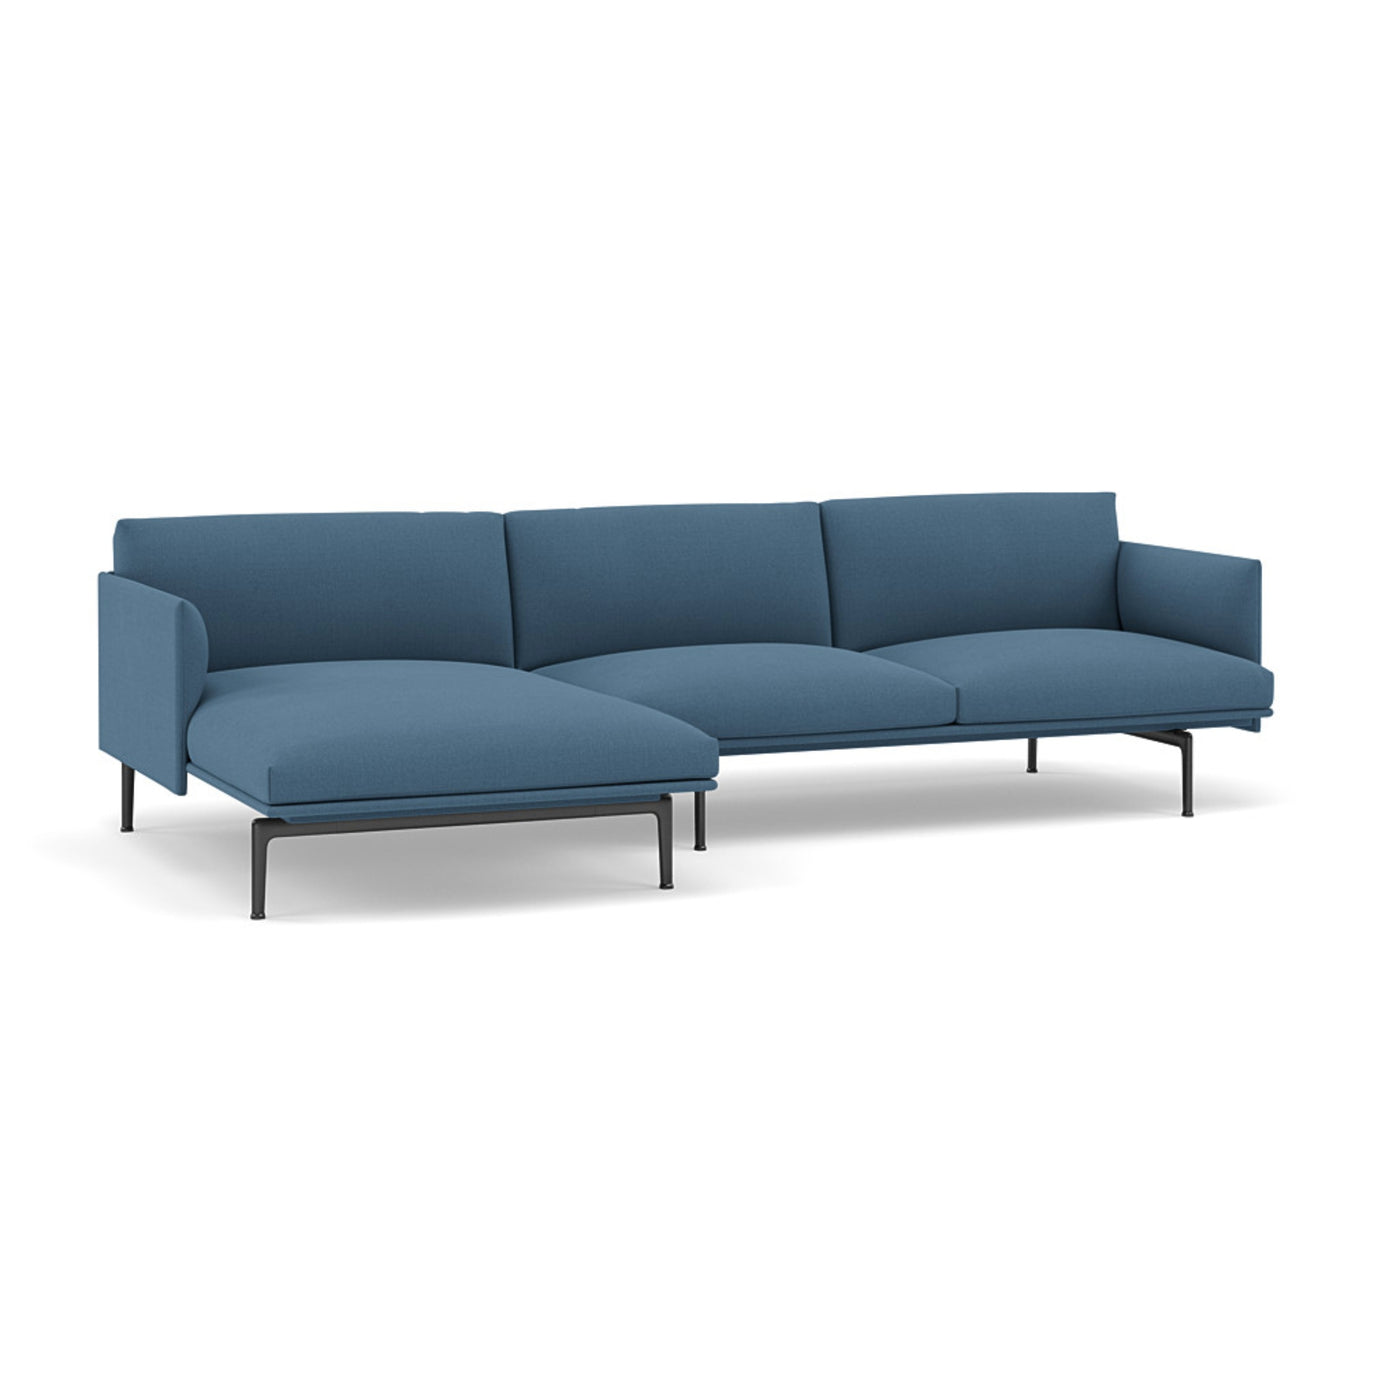 Muuto Outline Chaise Longue sofa. Made to order from someday designs. #colour_vidar-733